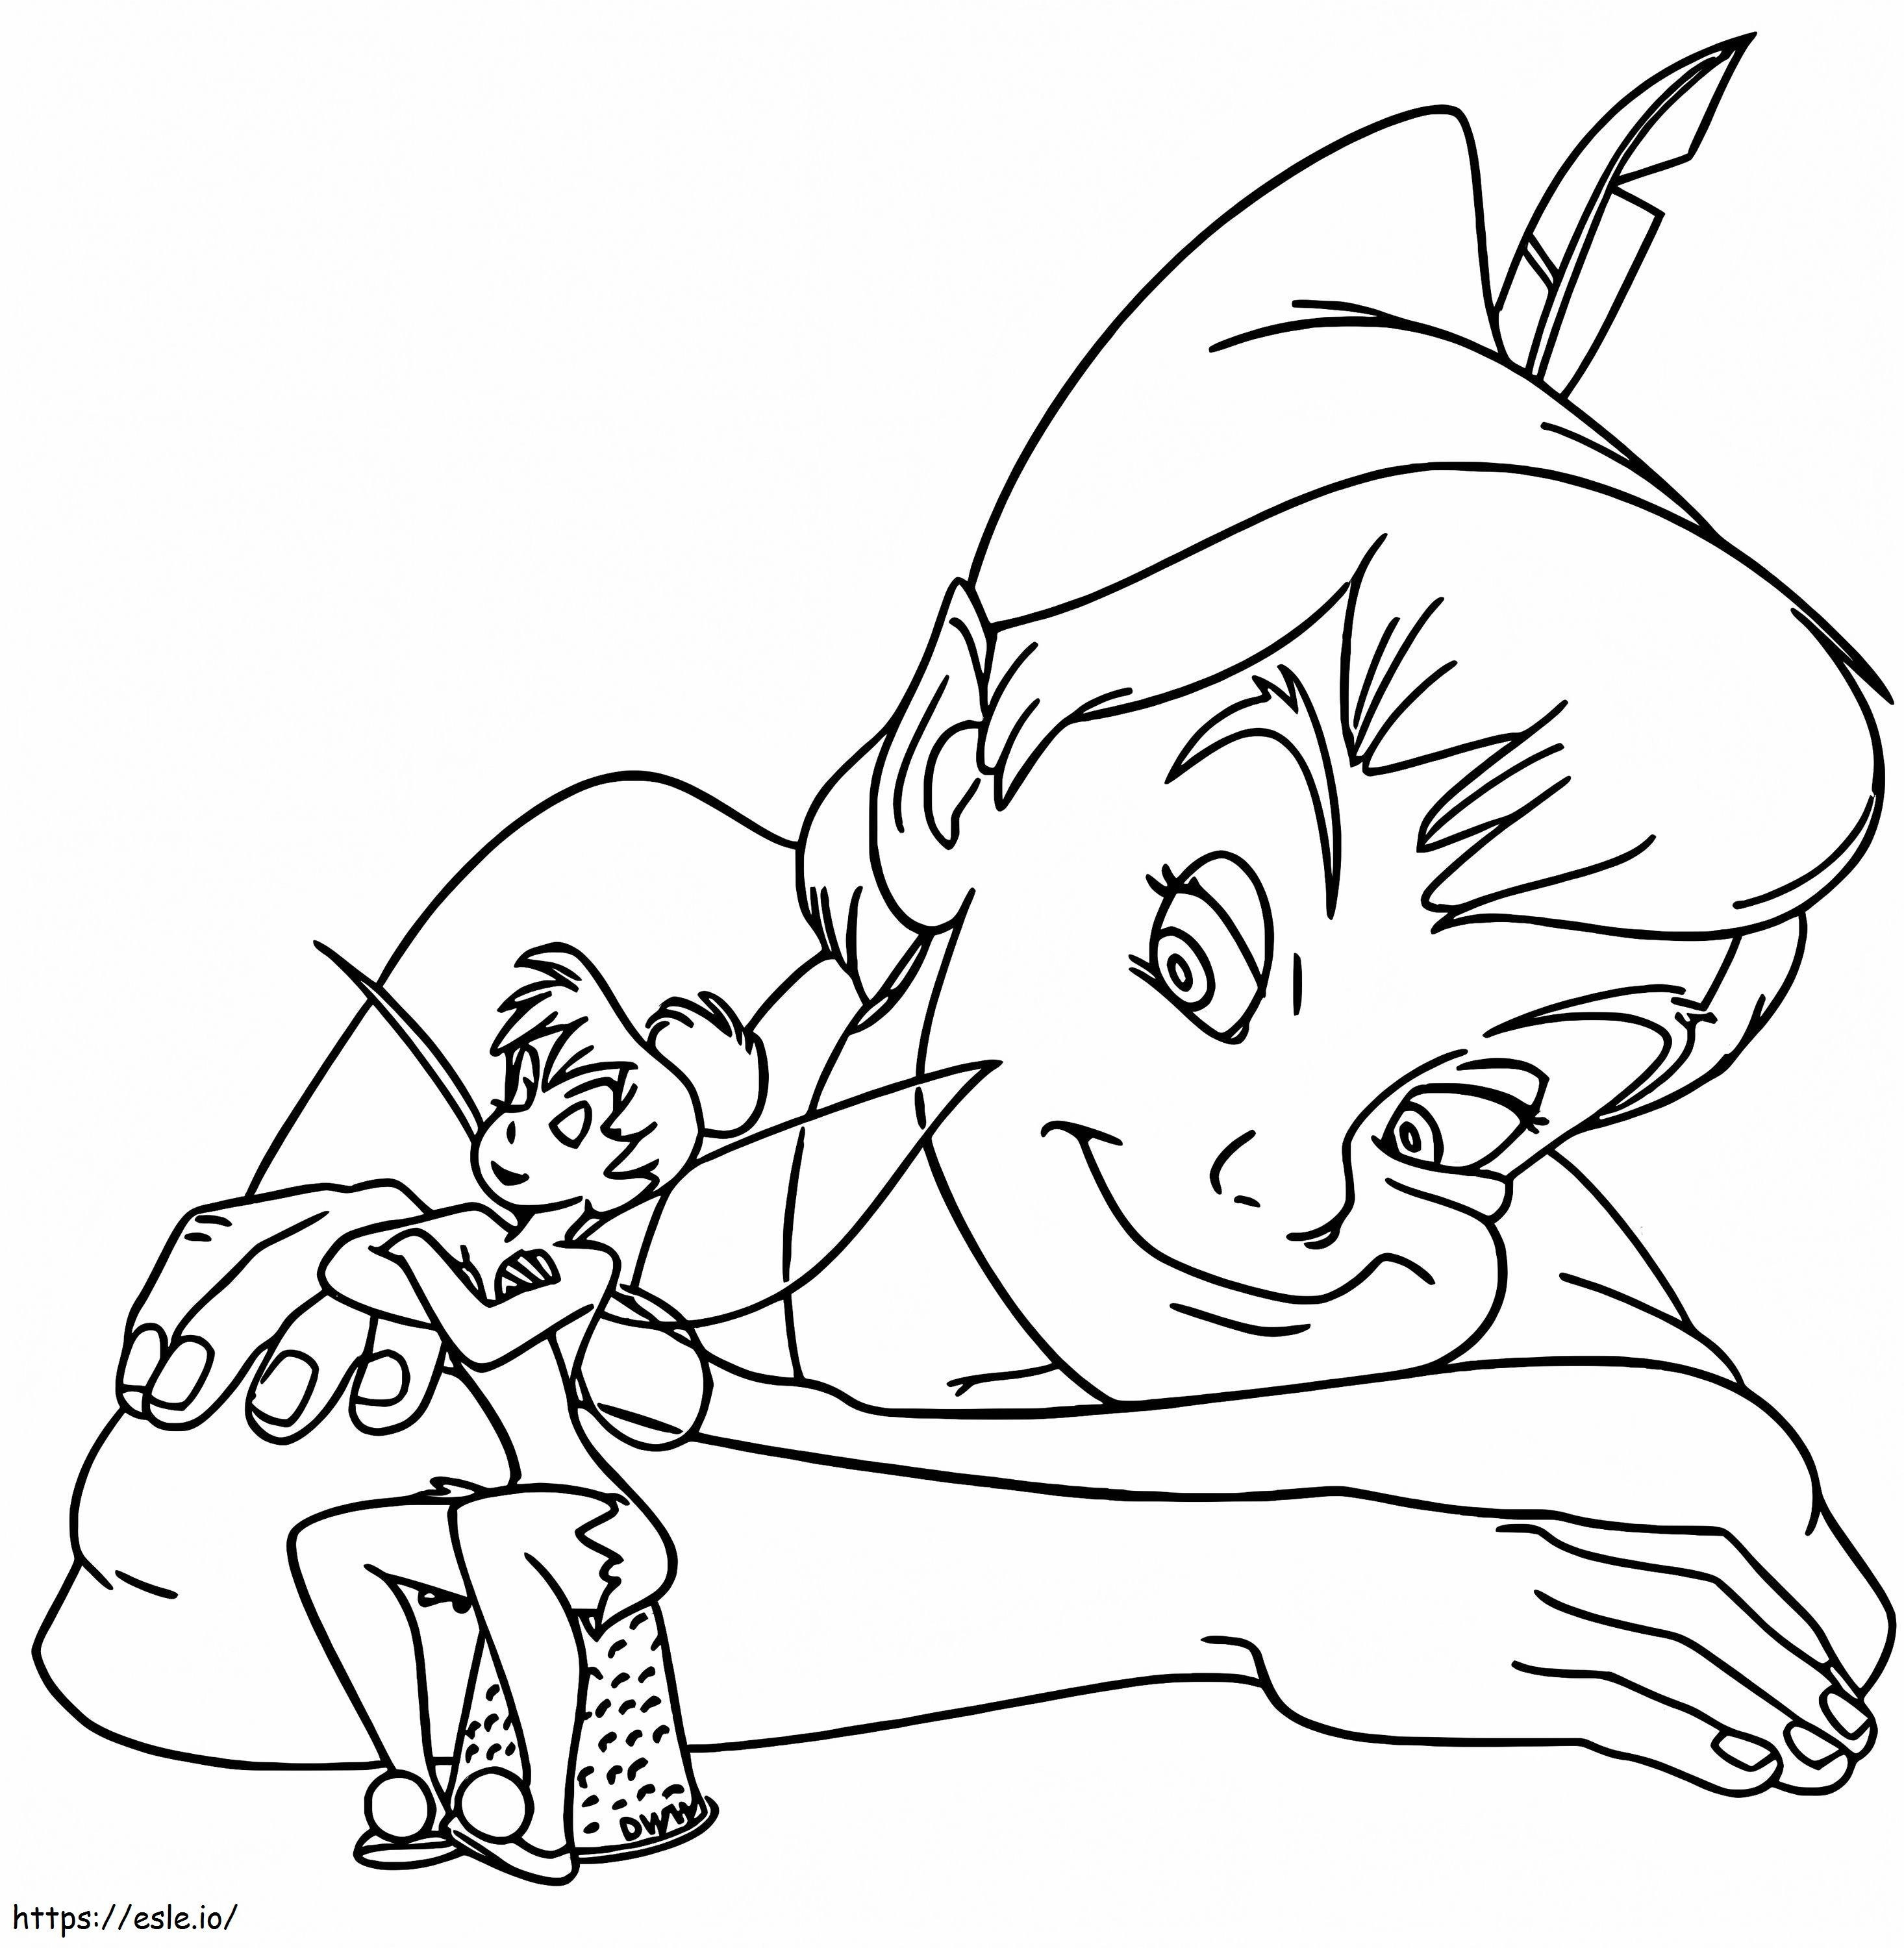 Peter Pan And Tinker Bell coloring page